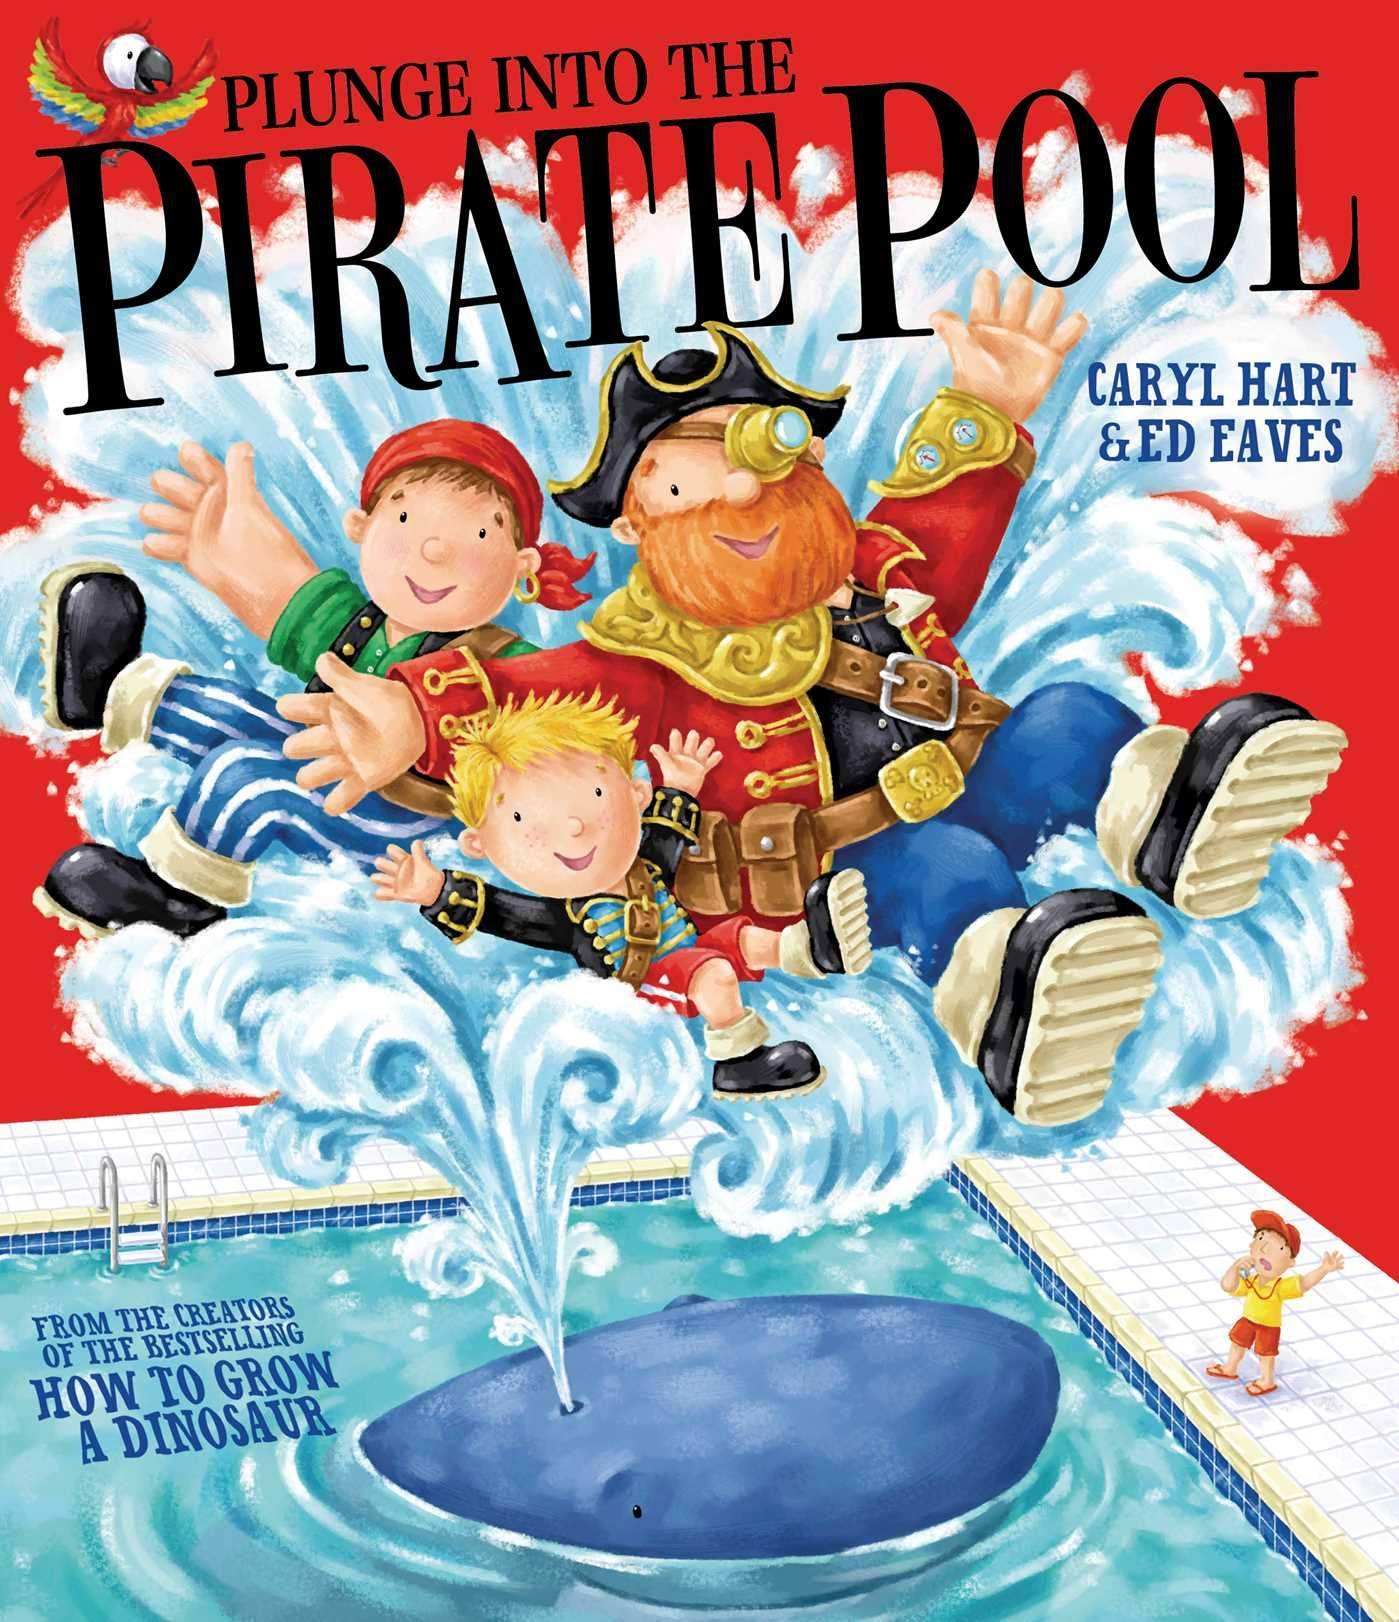 IMG : Plunge Into the Pirate Pool